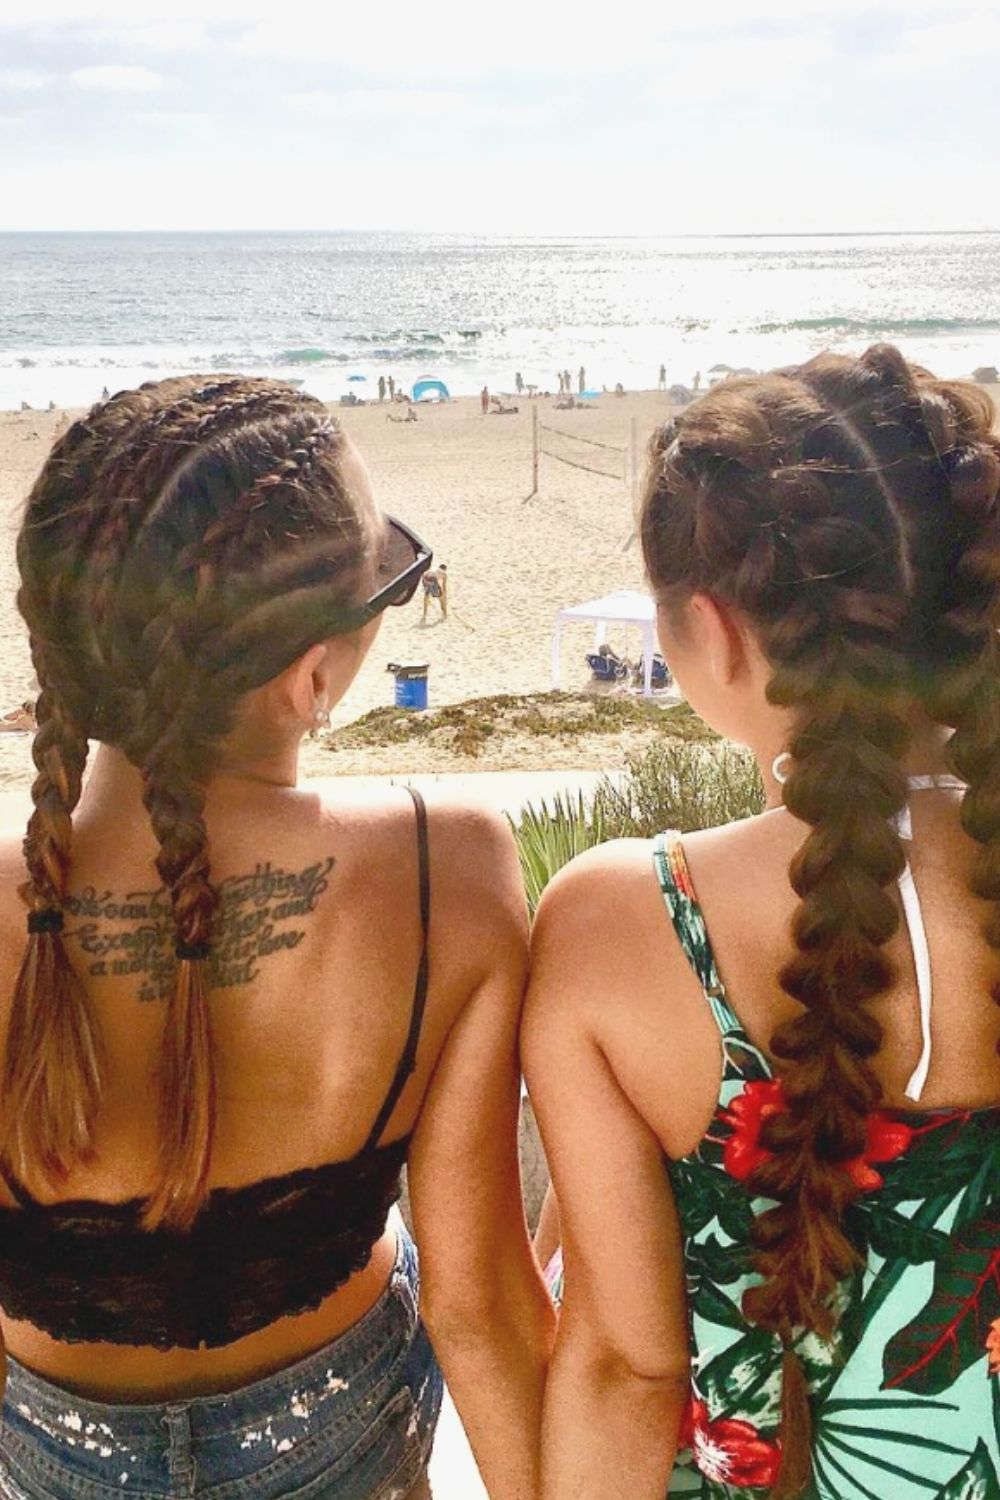 Beautiful Beach Hairstyle For A Meaningful Vacation 2021!